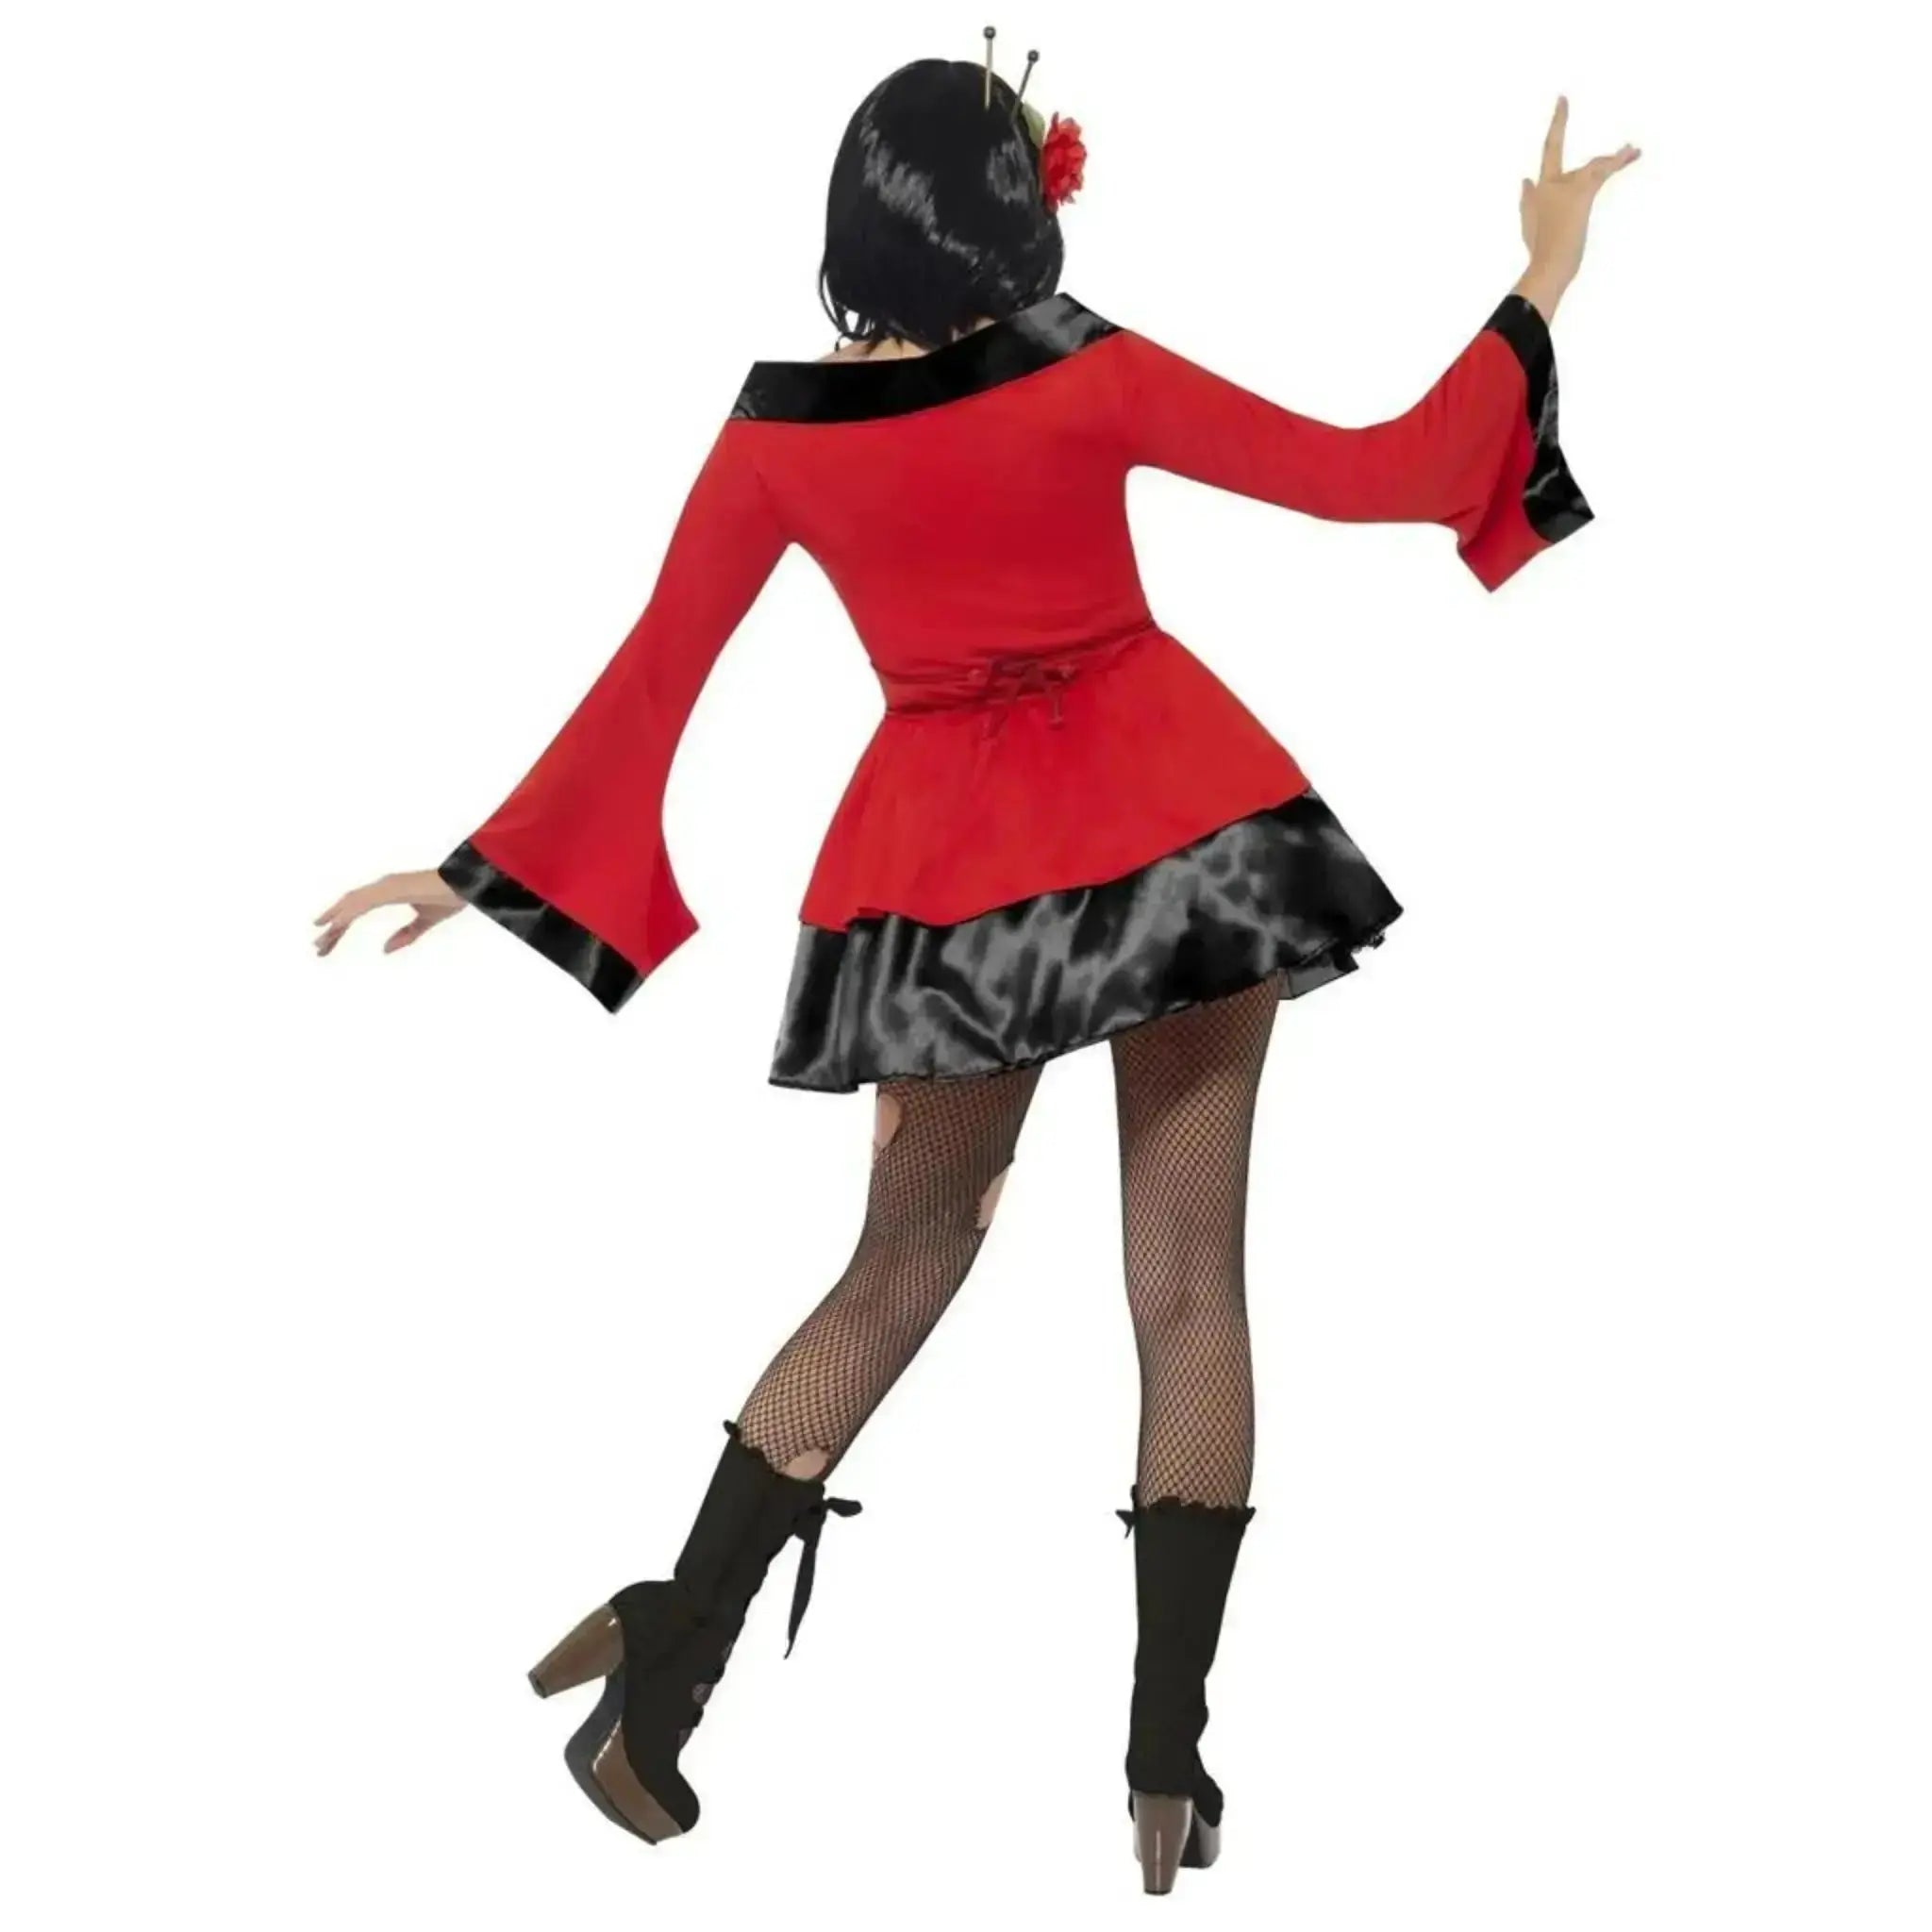 Gothic Geisha Woman Costume | The Party Hut